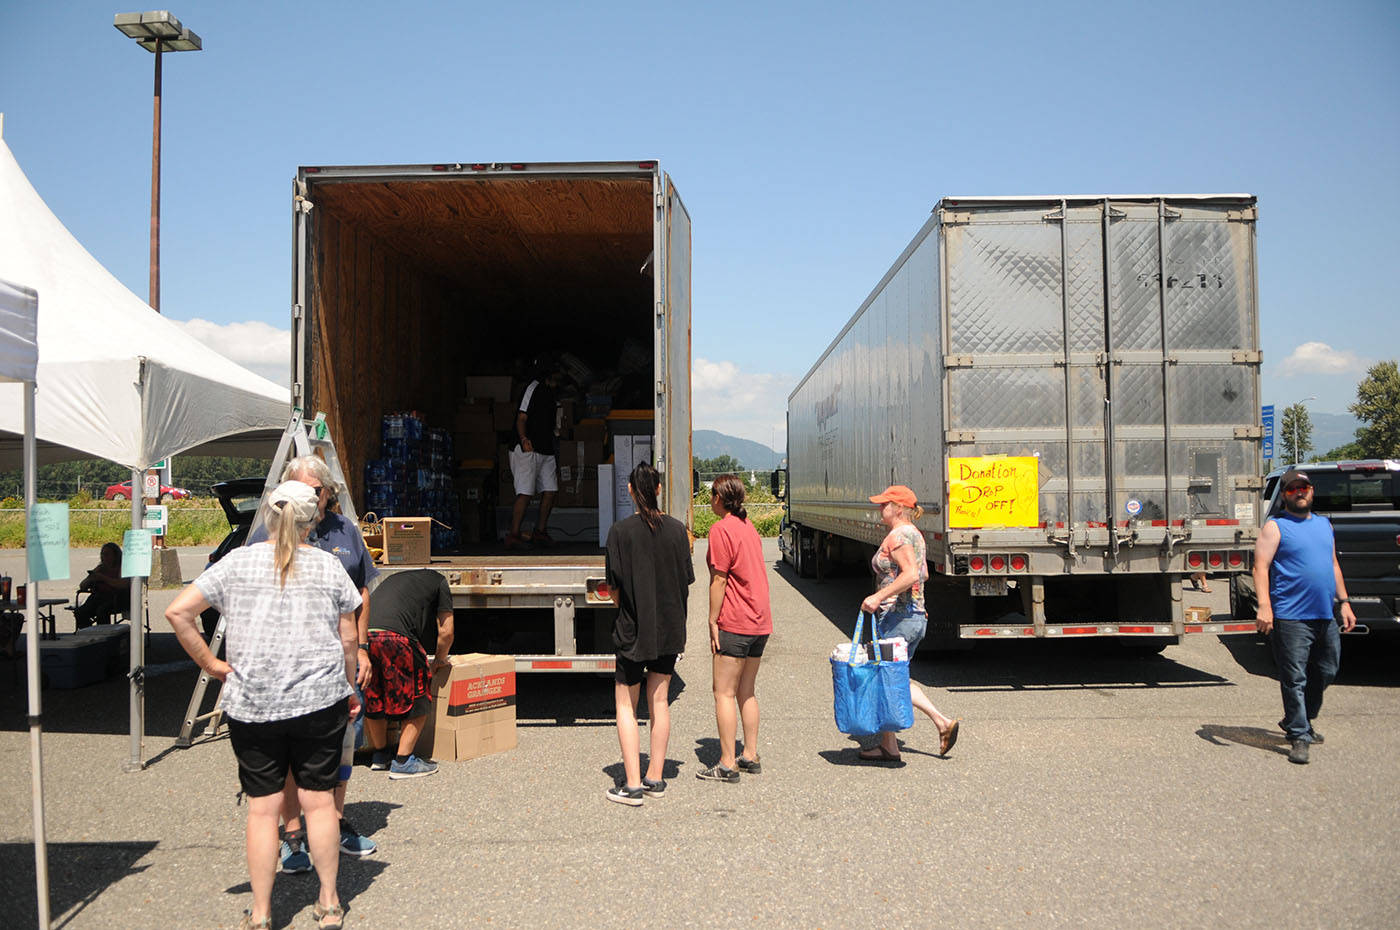 Folks take part in a donation drive for wildfire victims in the old Sears parking lot at Cottonwood Centre on Saturday, July 3, 2021. (Jenna Hauck/ Chilliwack Progress)